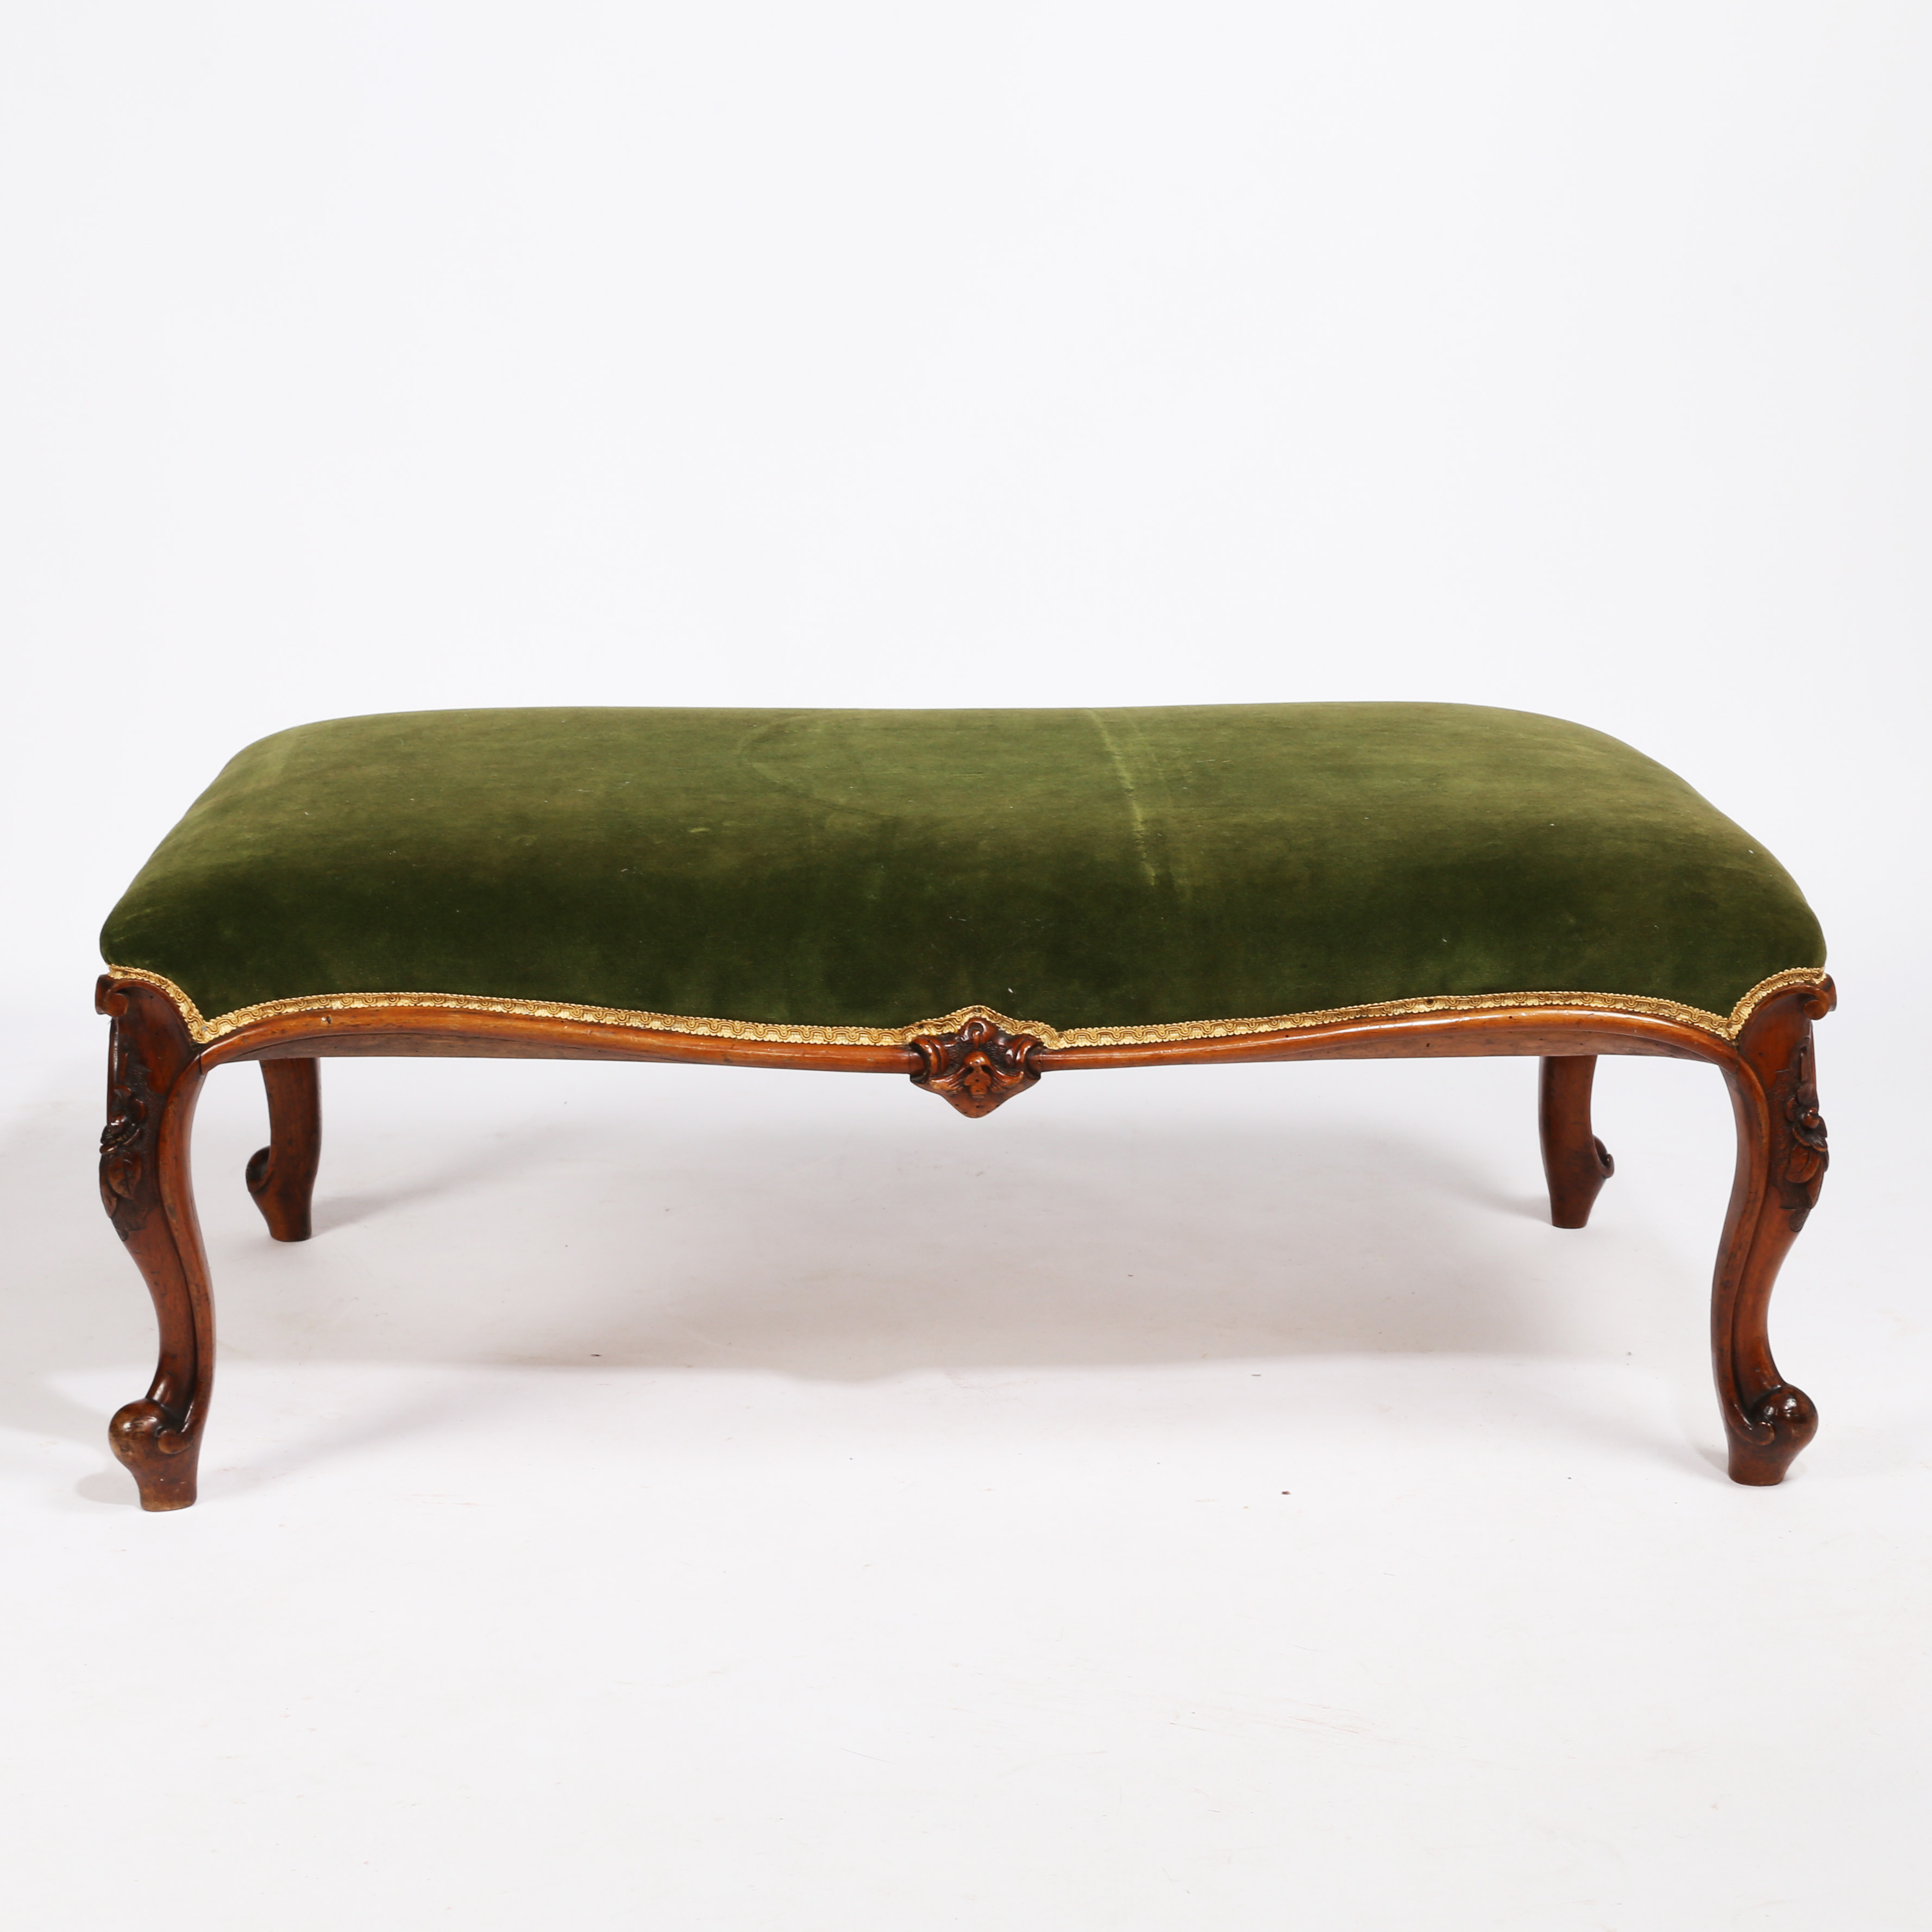 A LARGE 19TH CENTURY WALNUT AND UPHOLSTERED FOOTSTOOL.